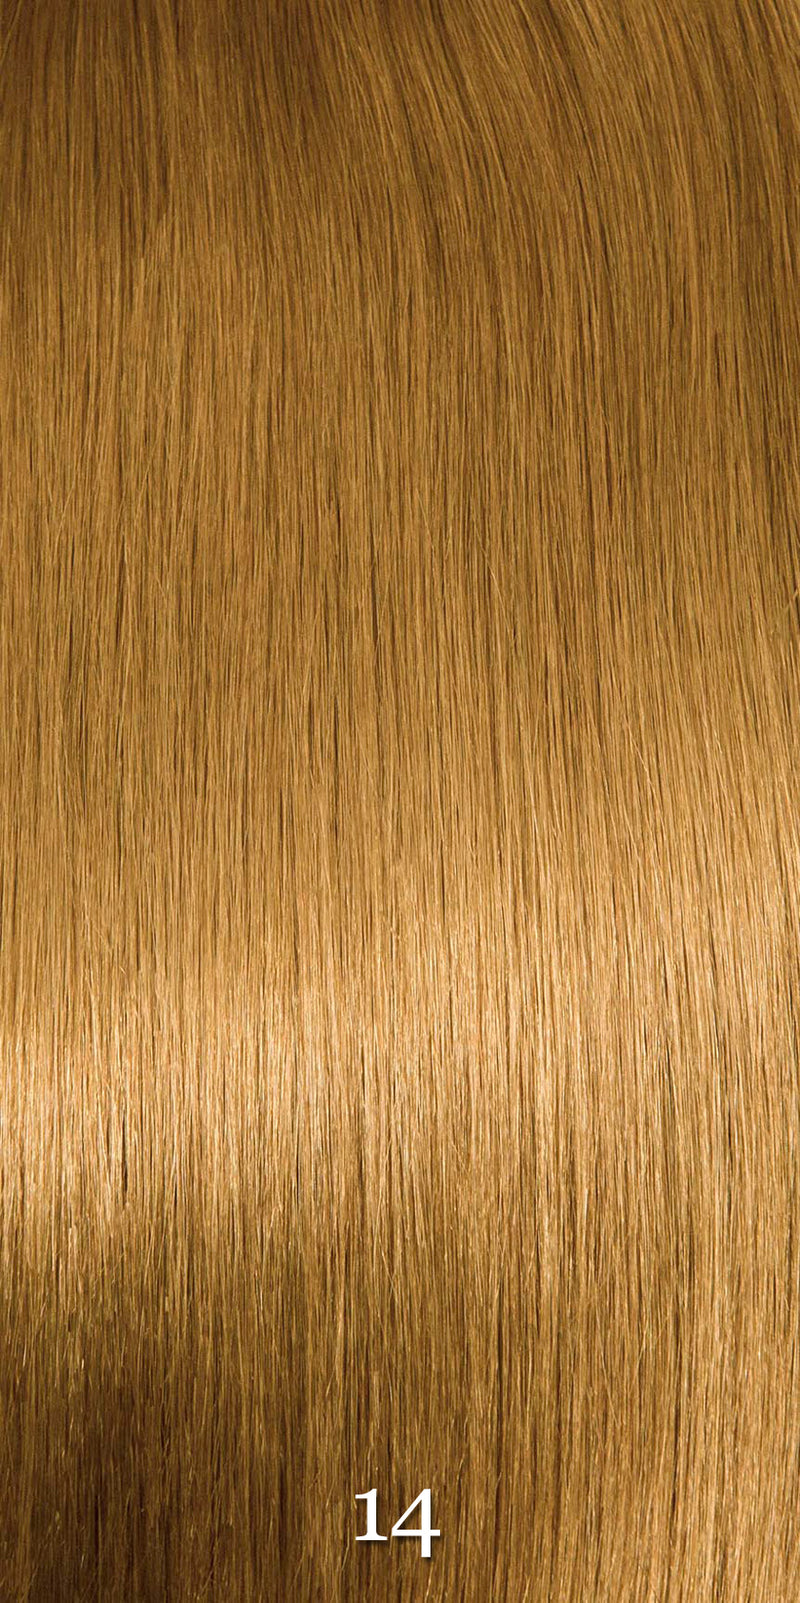 Bohyme Luxe Machine-tied Silky Straight 18"